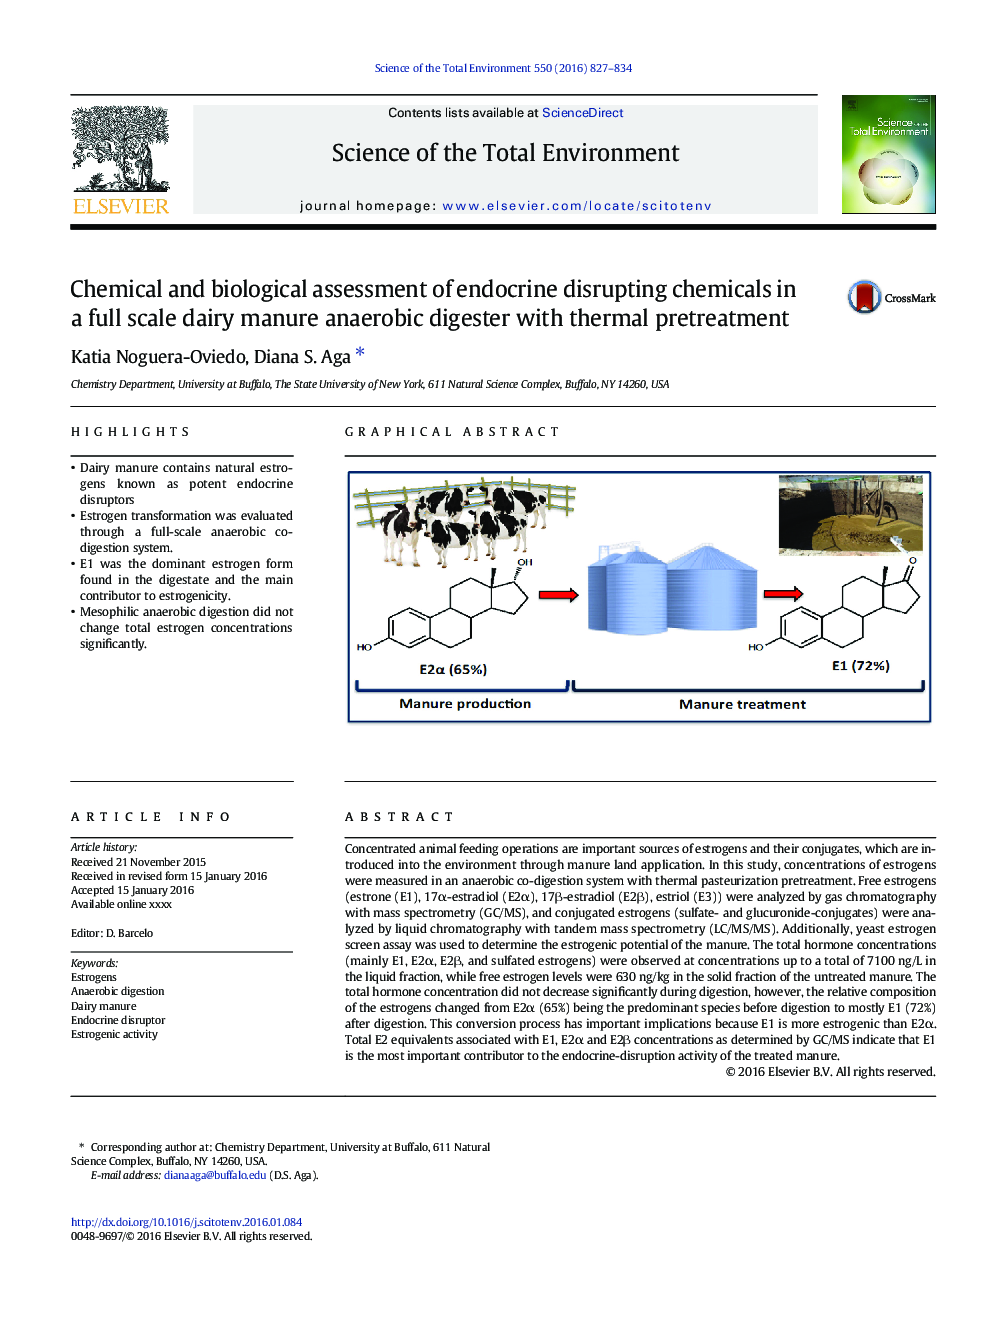 Chemical and biological assessment of endocrine disrupting chemicals in a full scale dairy manure anaerobic digester with thermal pretreatment